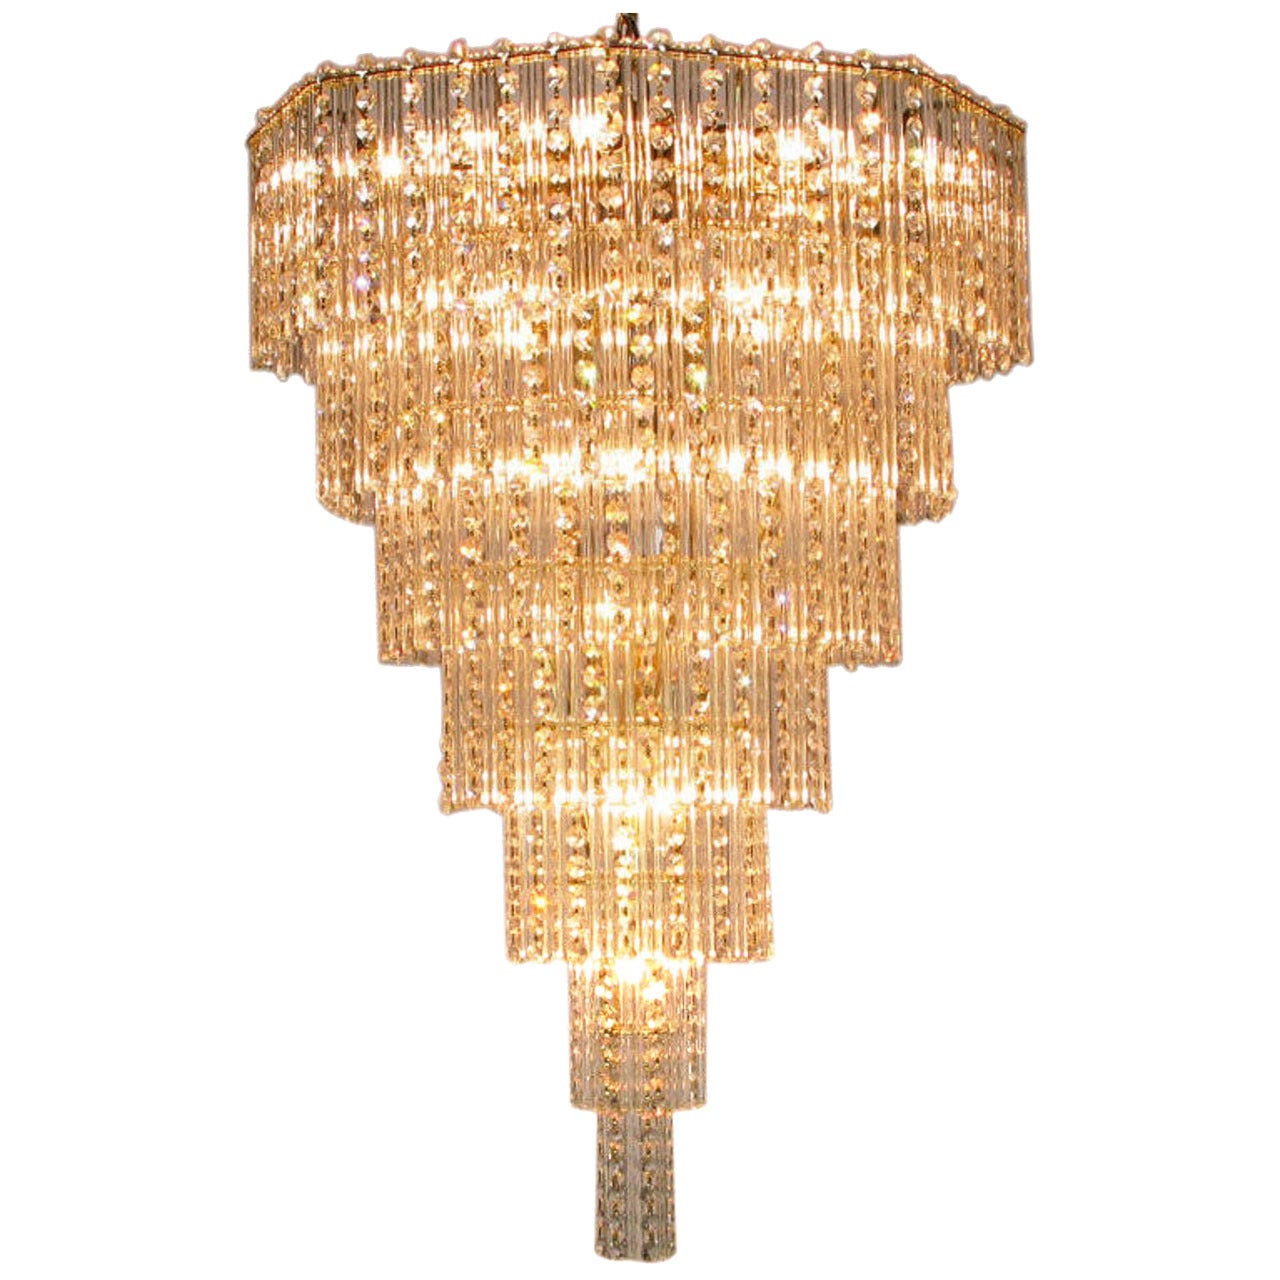 Seven Tier Crystal Beads and Rods Brass Chandelier For Sale